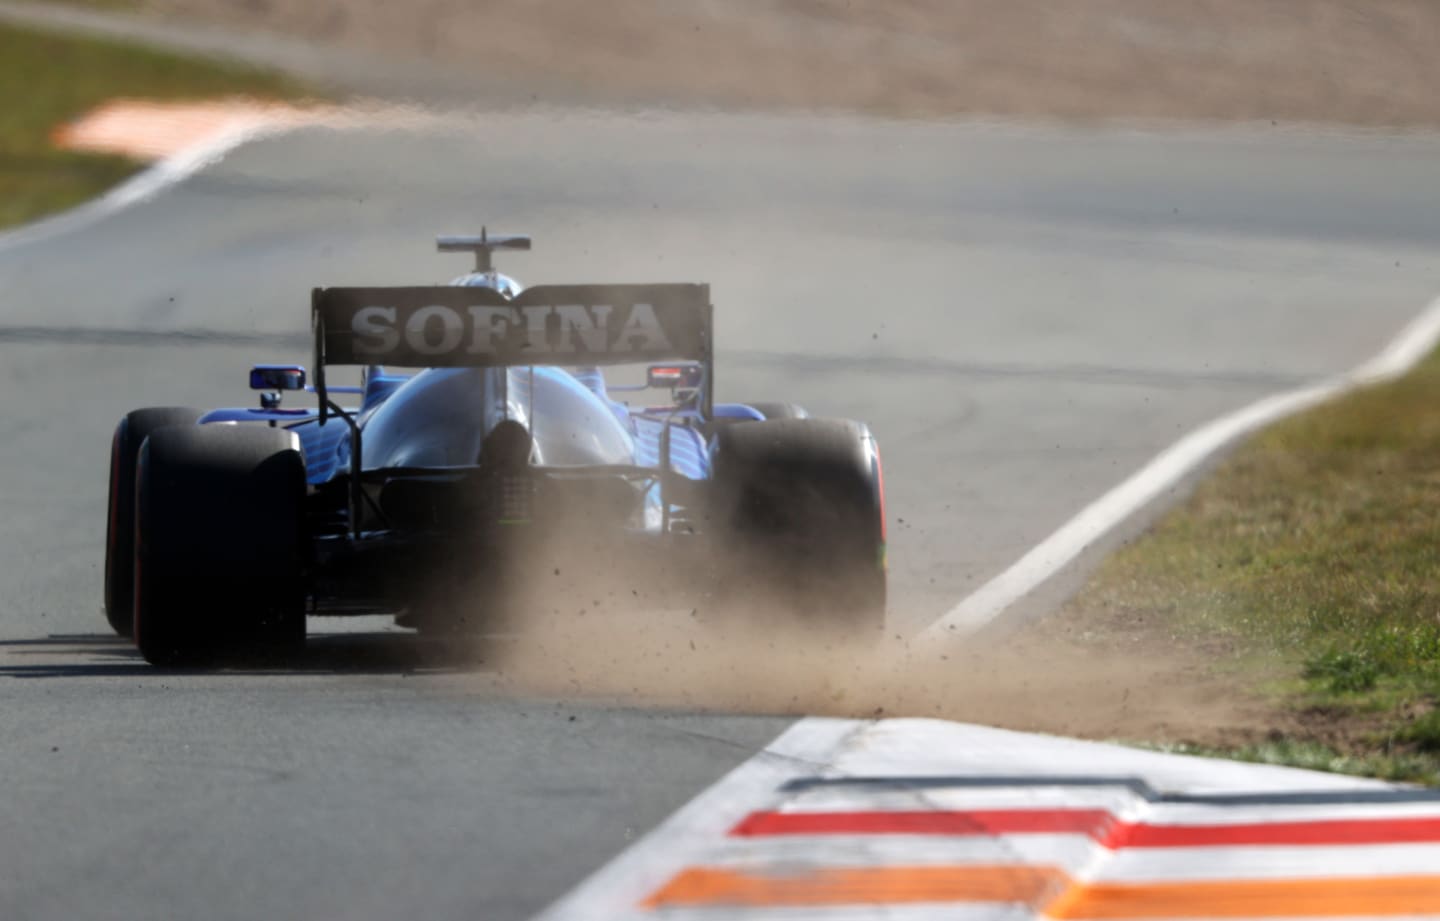 ZANDVOORT, NETHERLANDS - SEPTEMBER 04: George Russell of Great Britain driving the (63) Williams Racing FW43B Mercedes during qualifying ahead of the F1 Grand Prix of The Netherlands at Circuit Zandvoort on September 04, 2021 in Zandvoort, Netherlands. (Photo by Bryn Lennon/Getty Images)